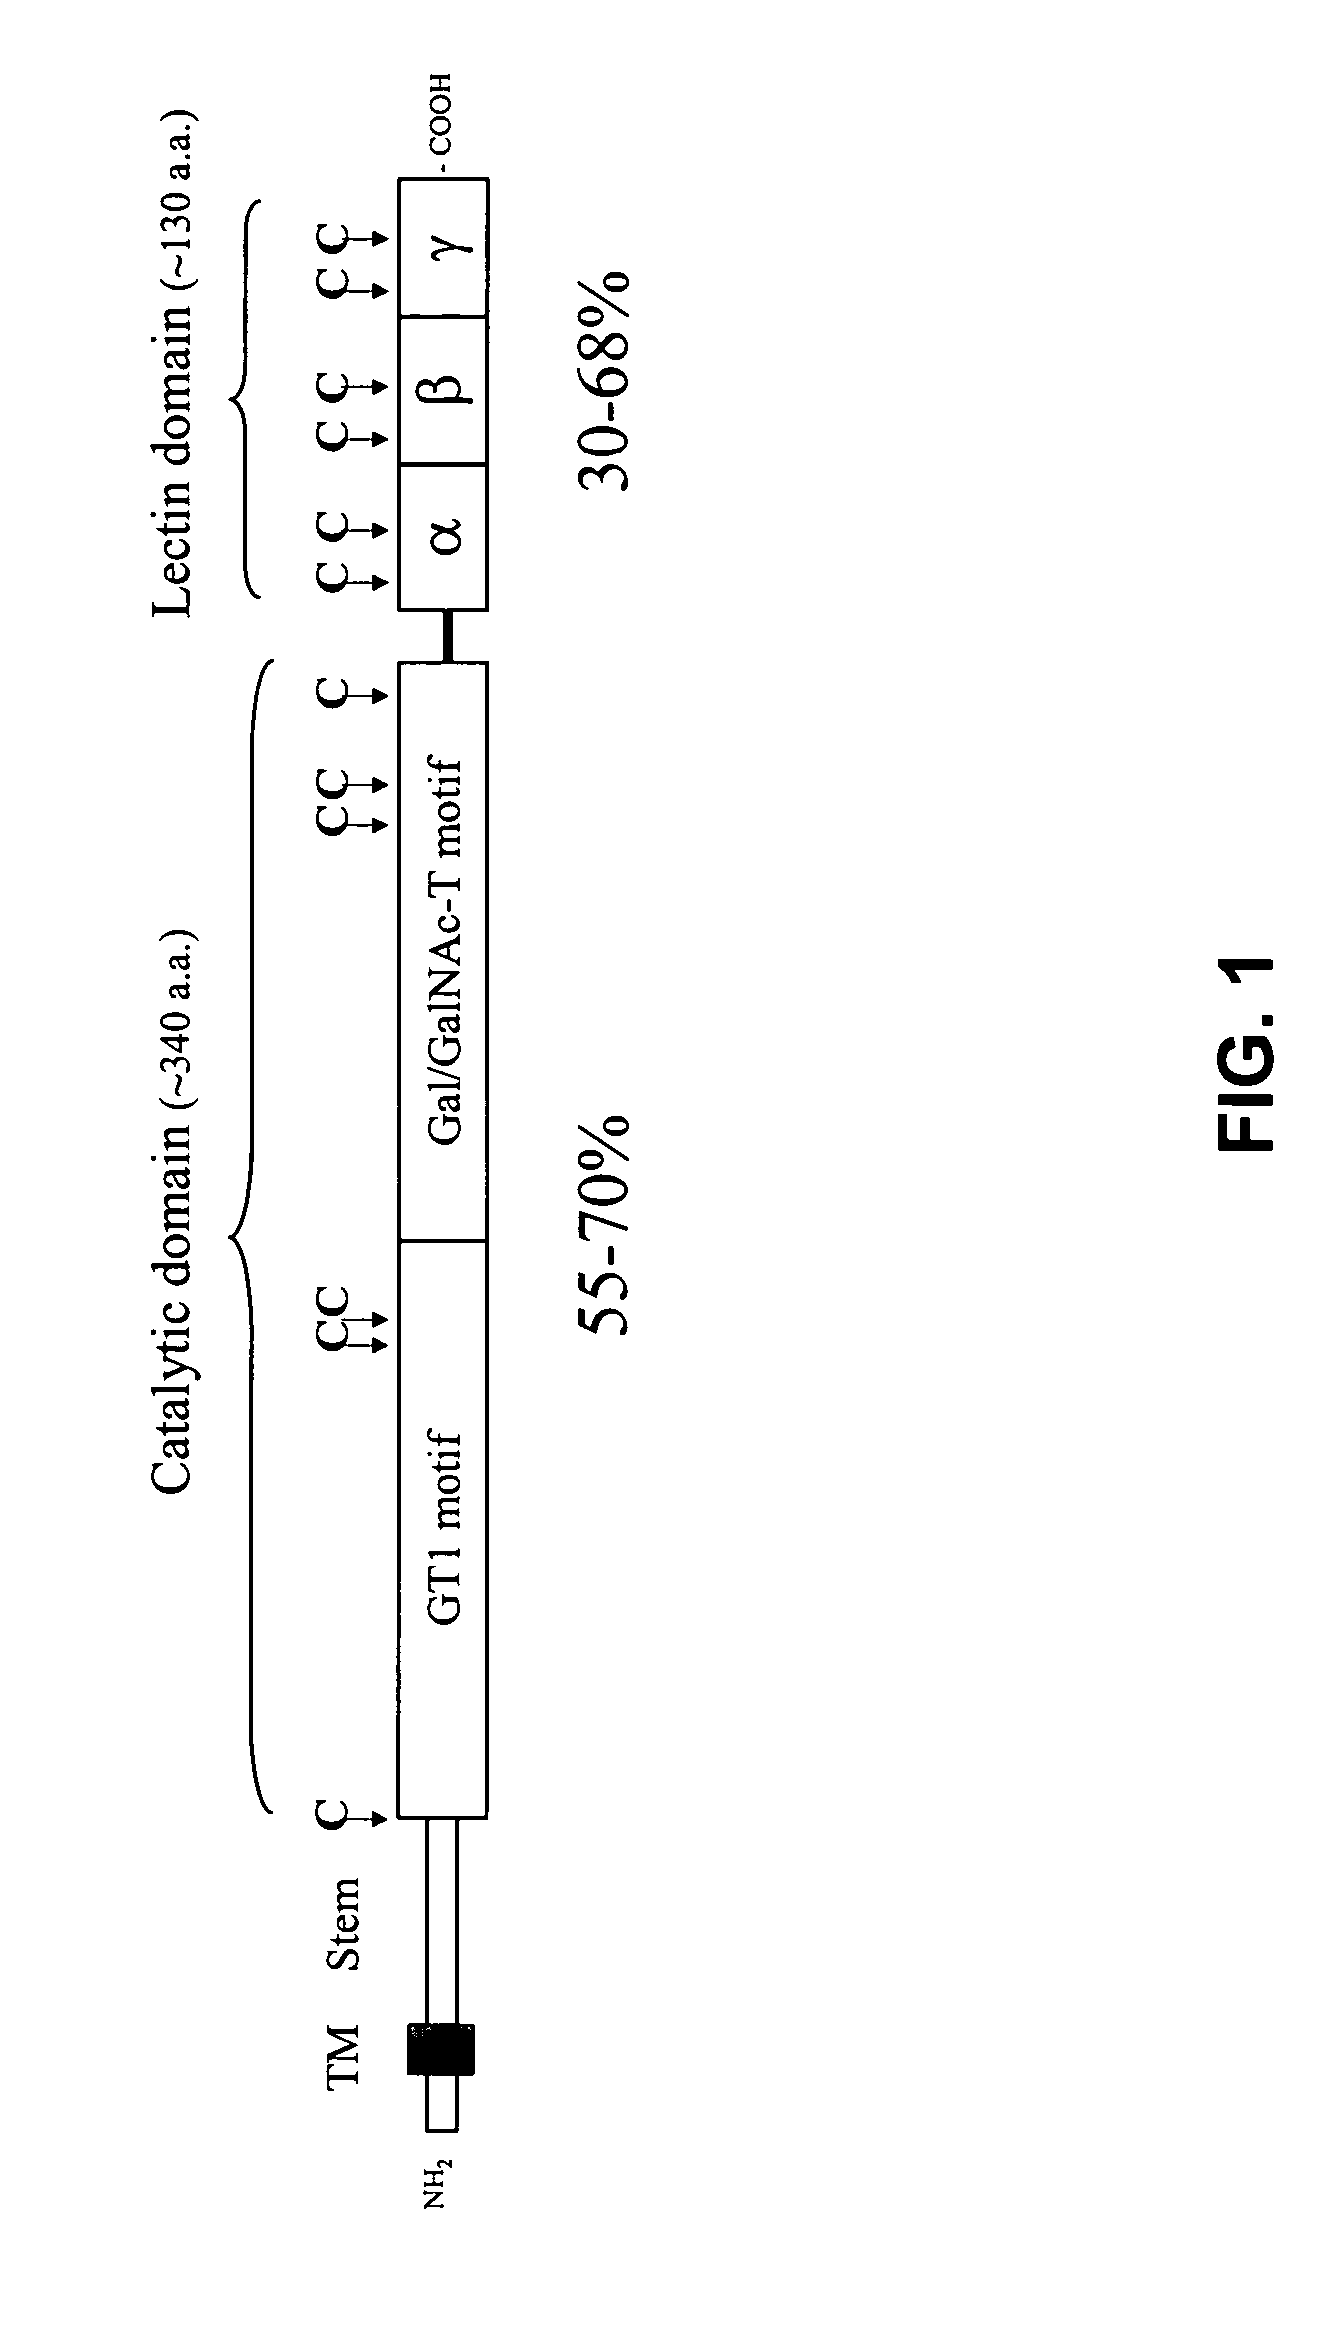 Methods to identify agents modulating functions of polypeptide galnac-transferases, pharmaceutical compositions comprising such agents and the use of such agents for preparing medicaments